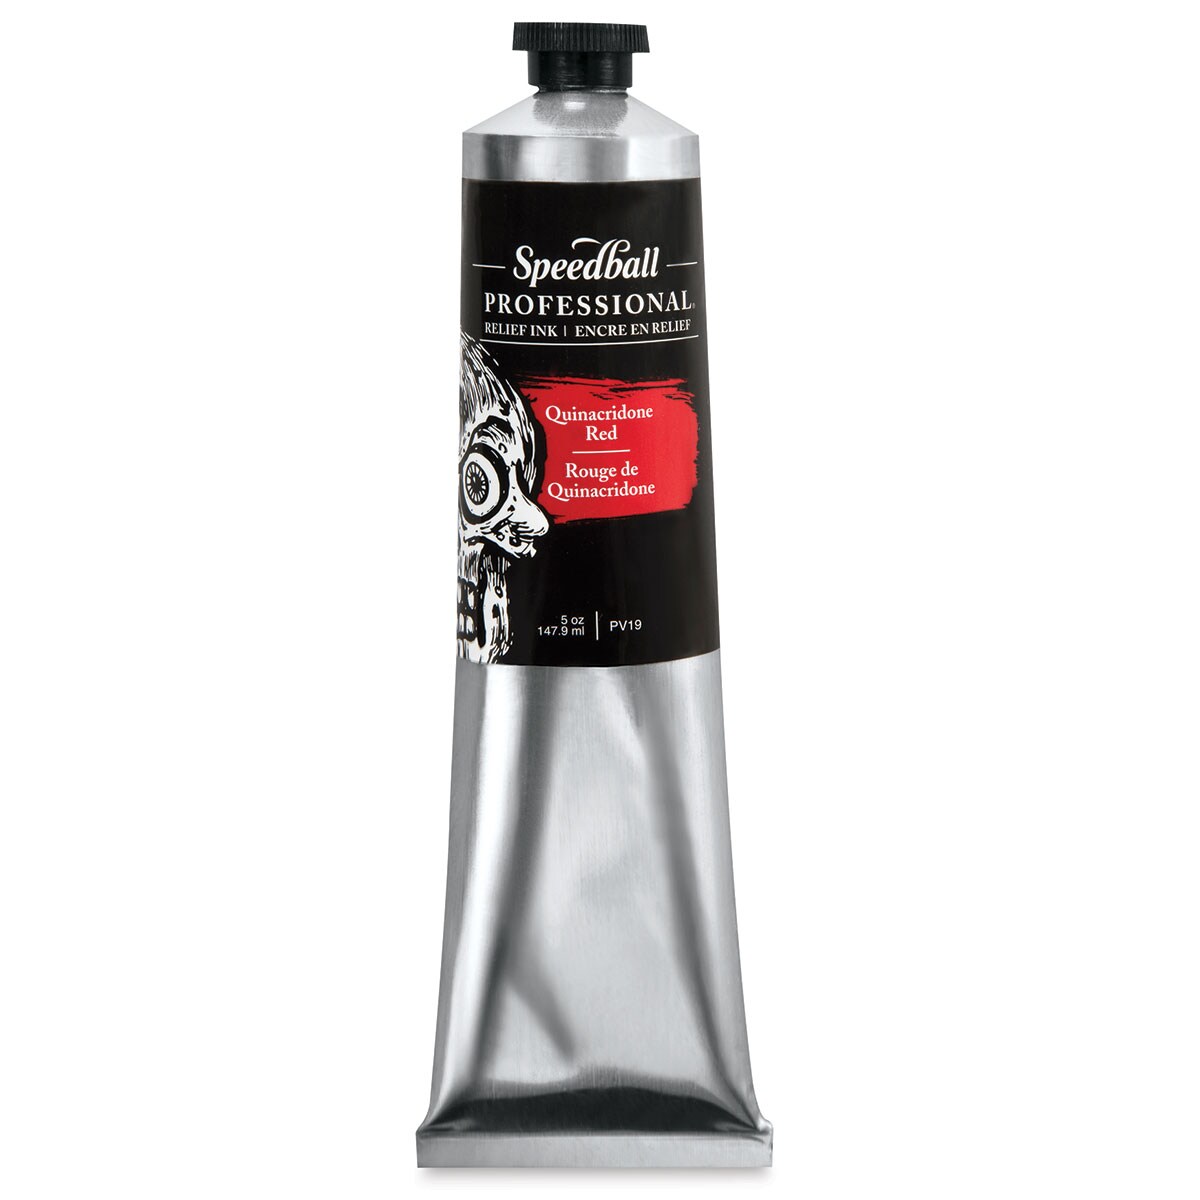 Speedball Professional Relief Ink - Quinacridone Red, 5 oz, Tube